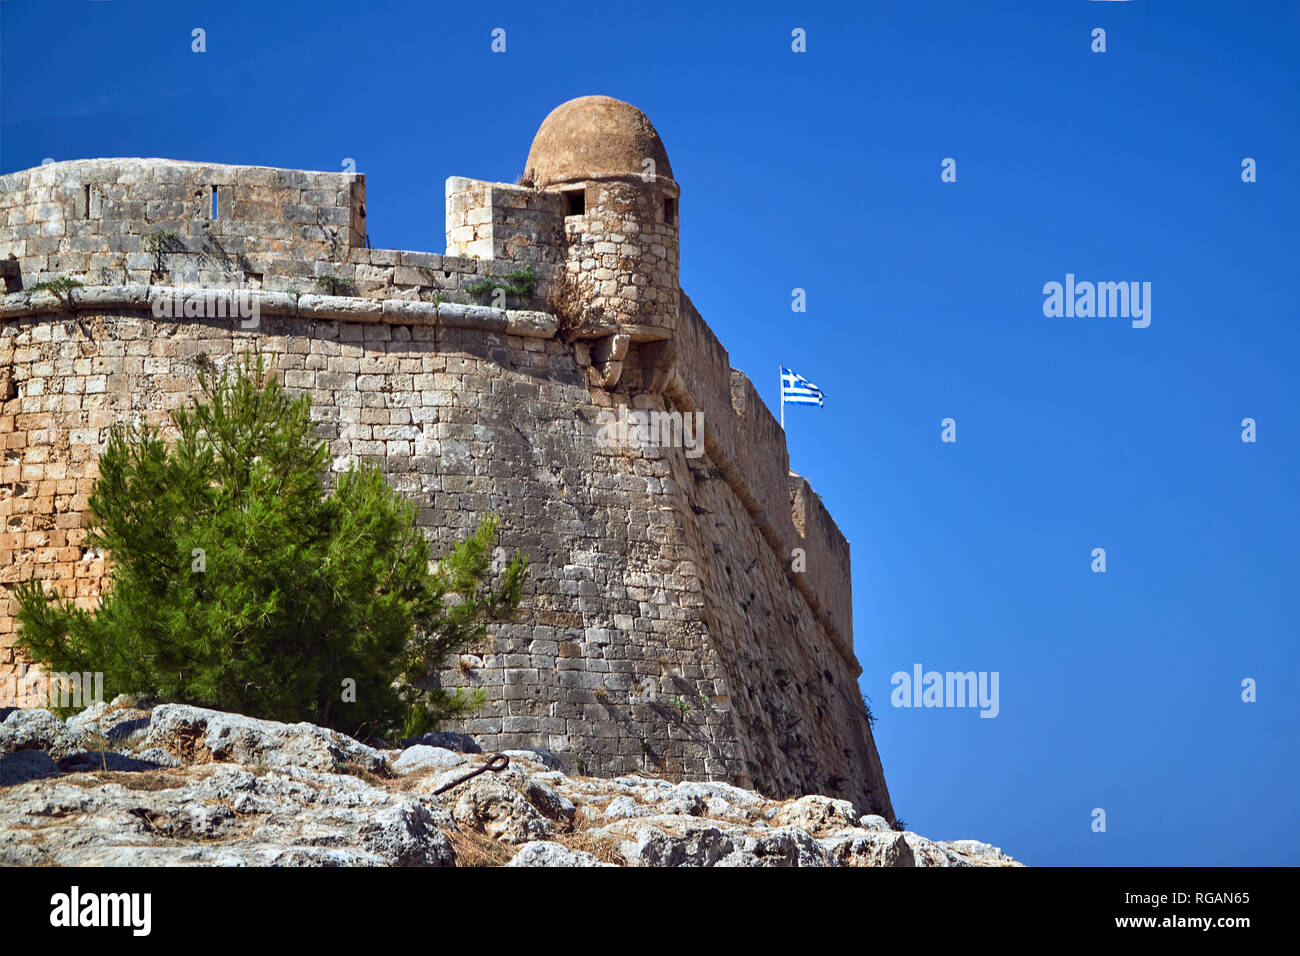 The Venetian walls, a medieval fortress in the city of Rethymnon Stock Photo